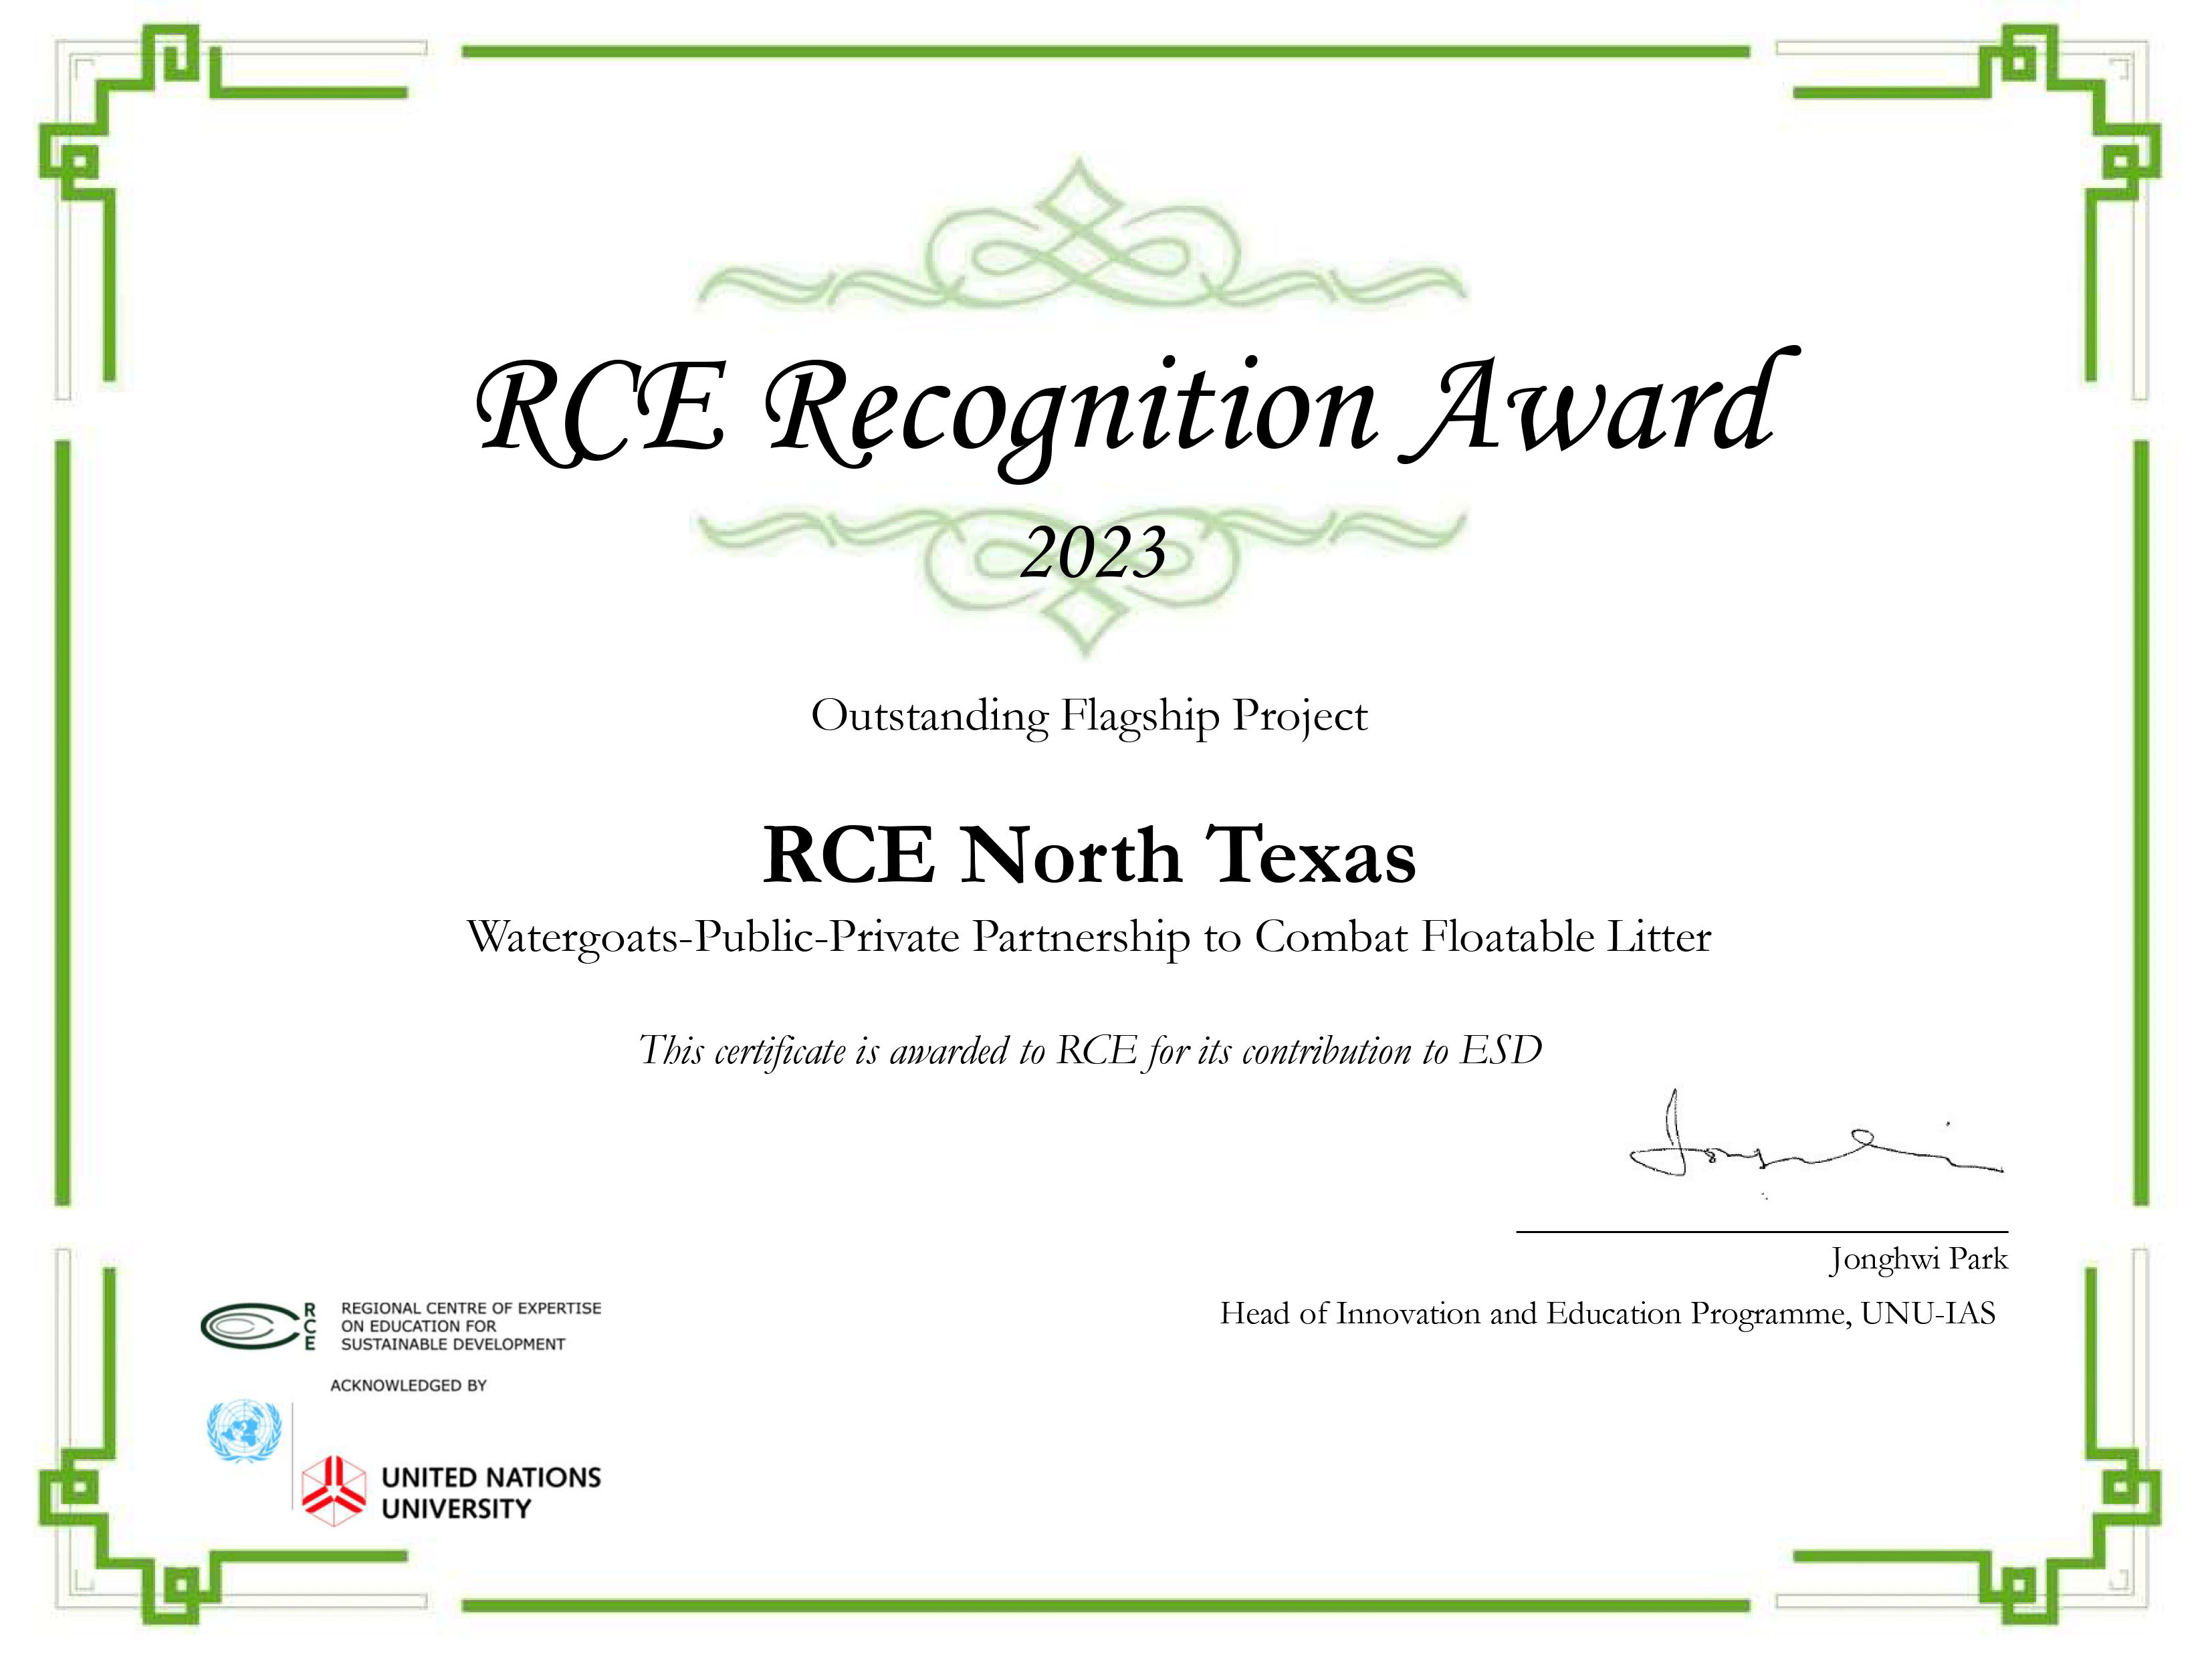 RCE Recognition for Outstanding Flagship Project Award